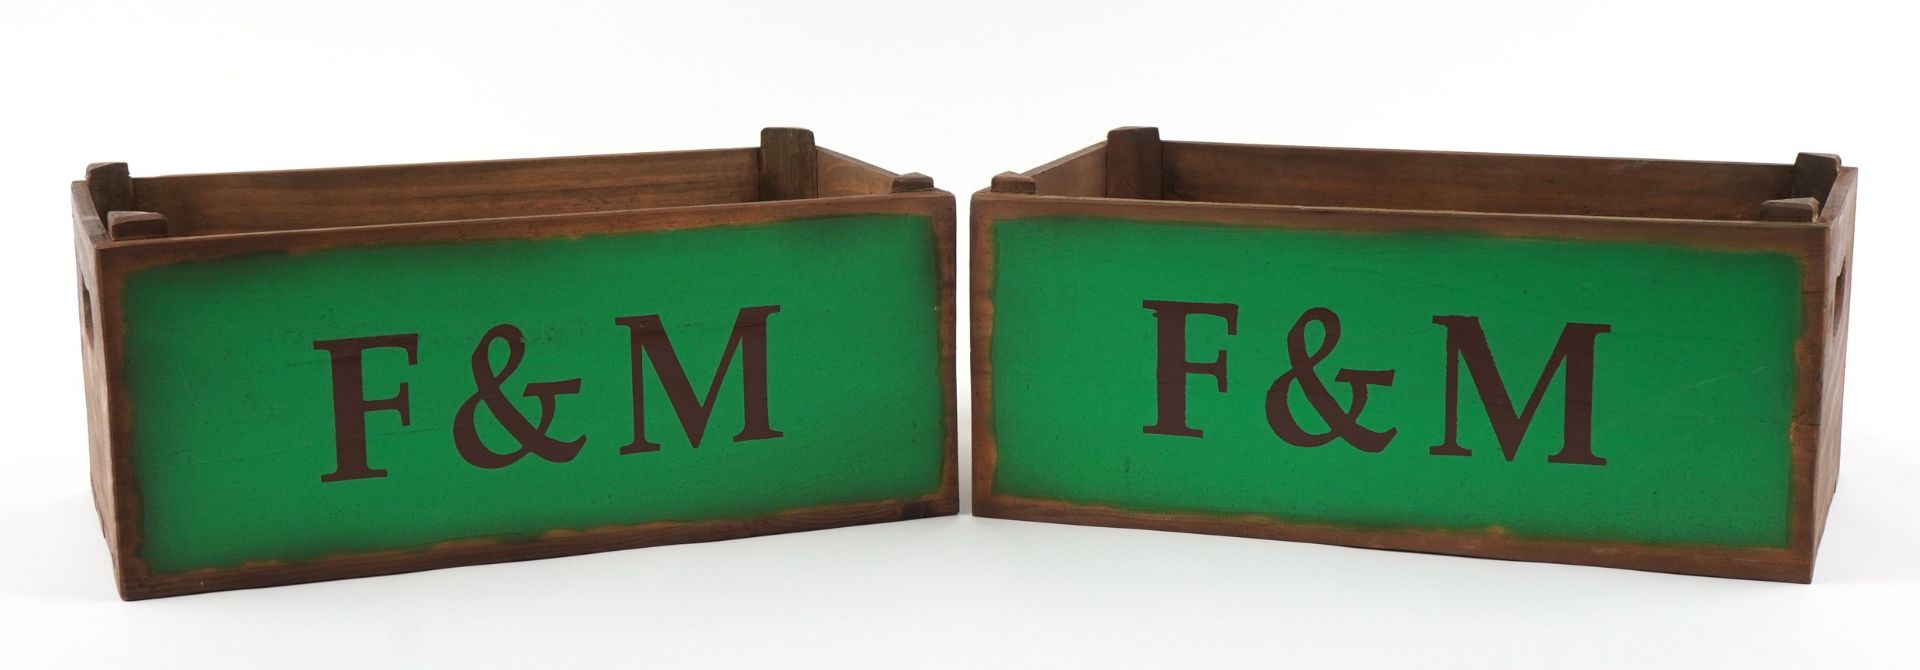 Pair of Fortnum & Mason design painted wooden crates, 18cm H x 44cm W x 25cm D : For further - Image 3 of 3